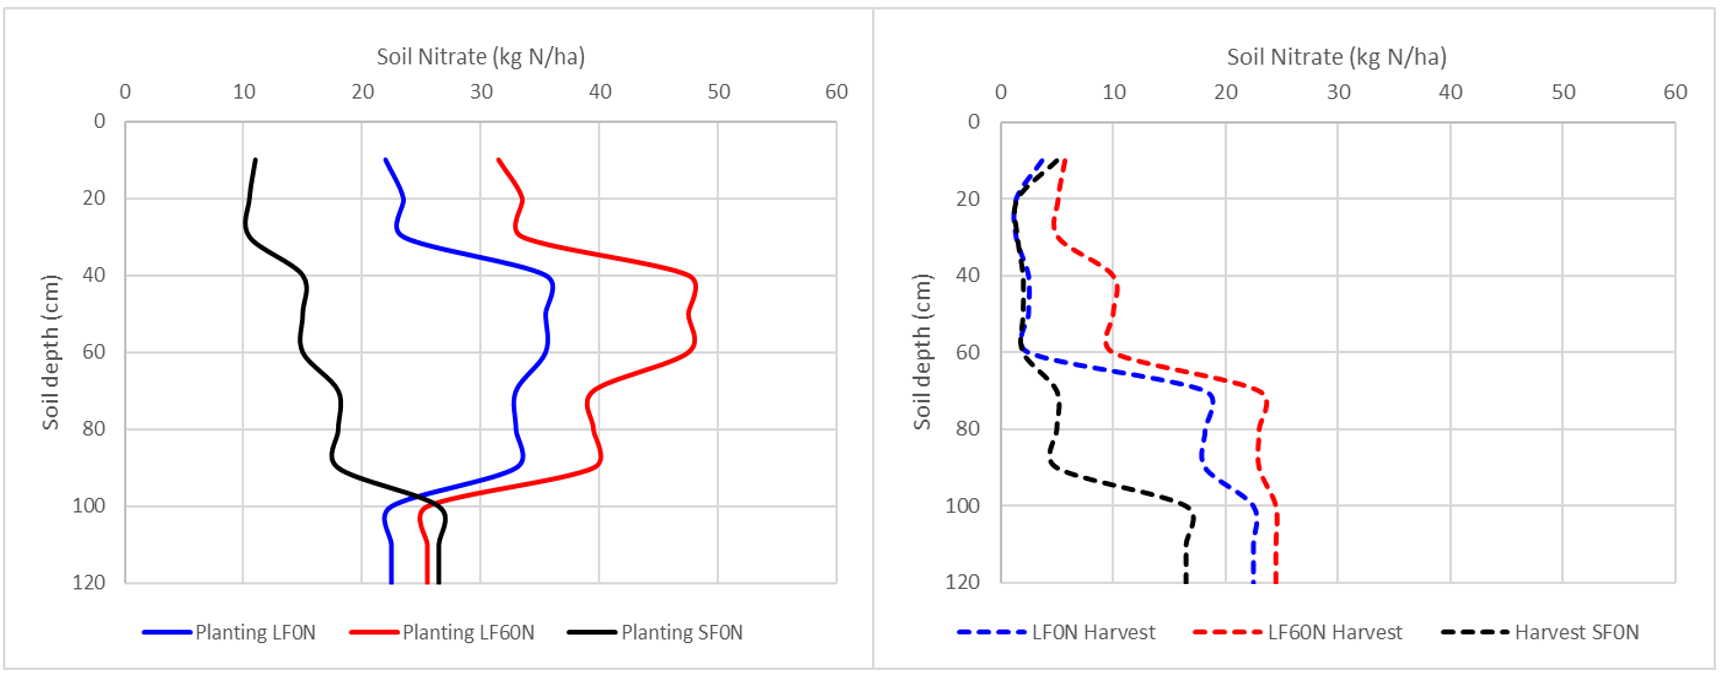 Side-by-side graphs showing Nitrate levels measured at planting (left) and after harvest (right) of mungbeans grown in 2020-2021.